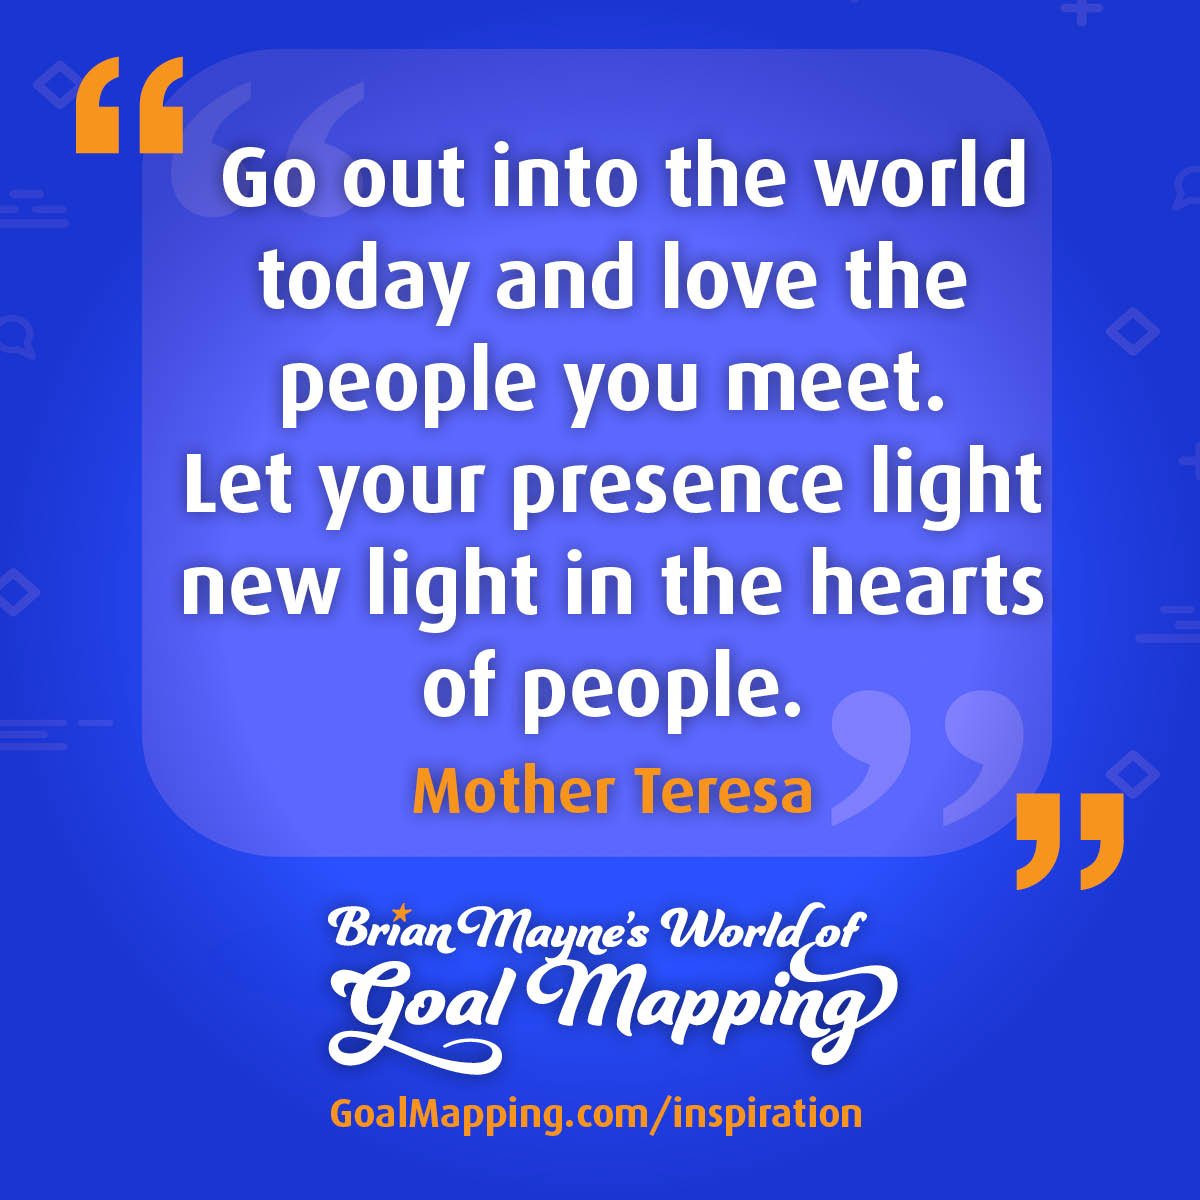 "Go out into the world today and love the people you meet. Let your presence light new light in the hearts of people." Mother Teresa